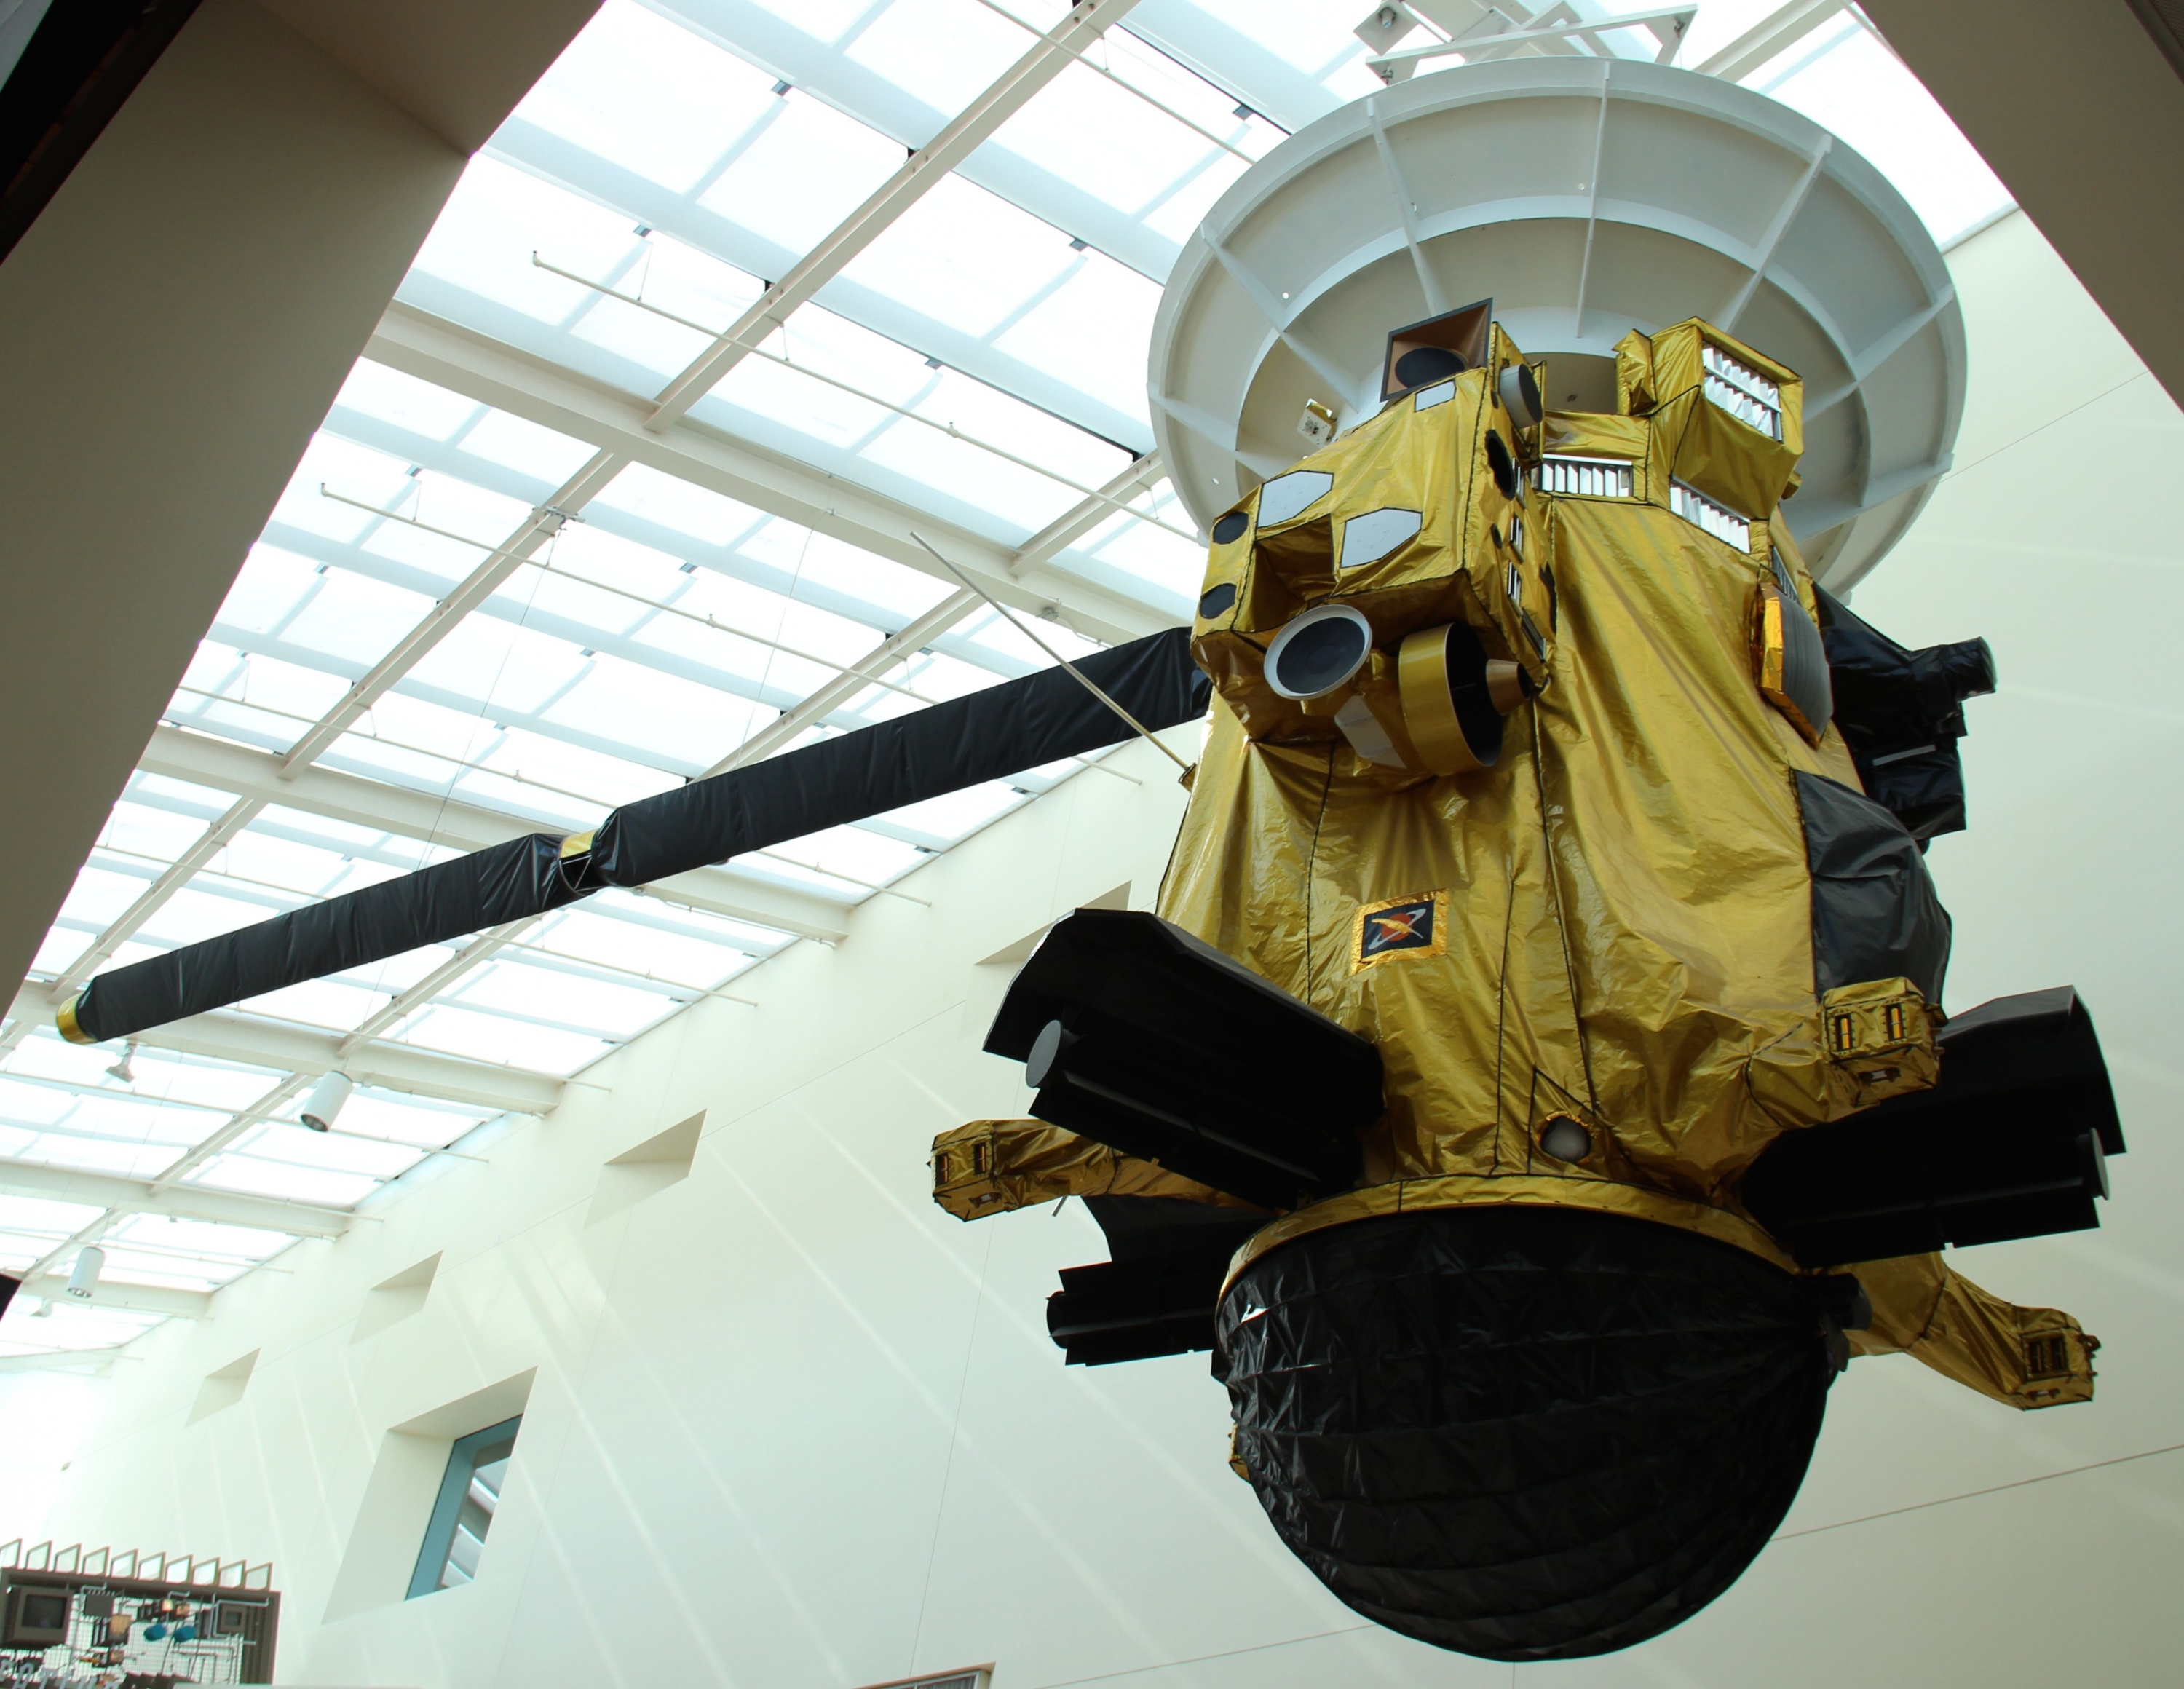 Cassini probe engineering model on display at the California Science Center